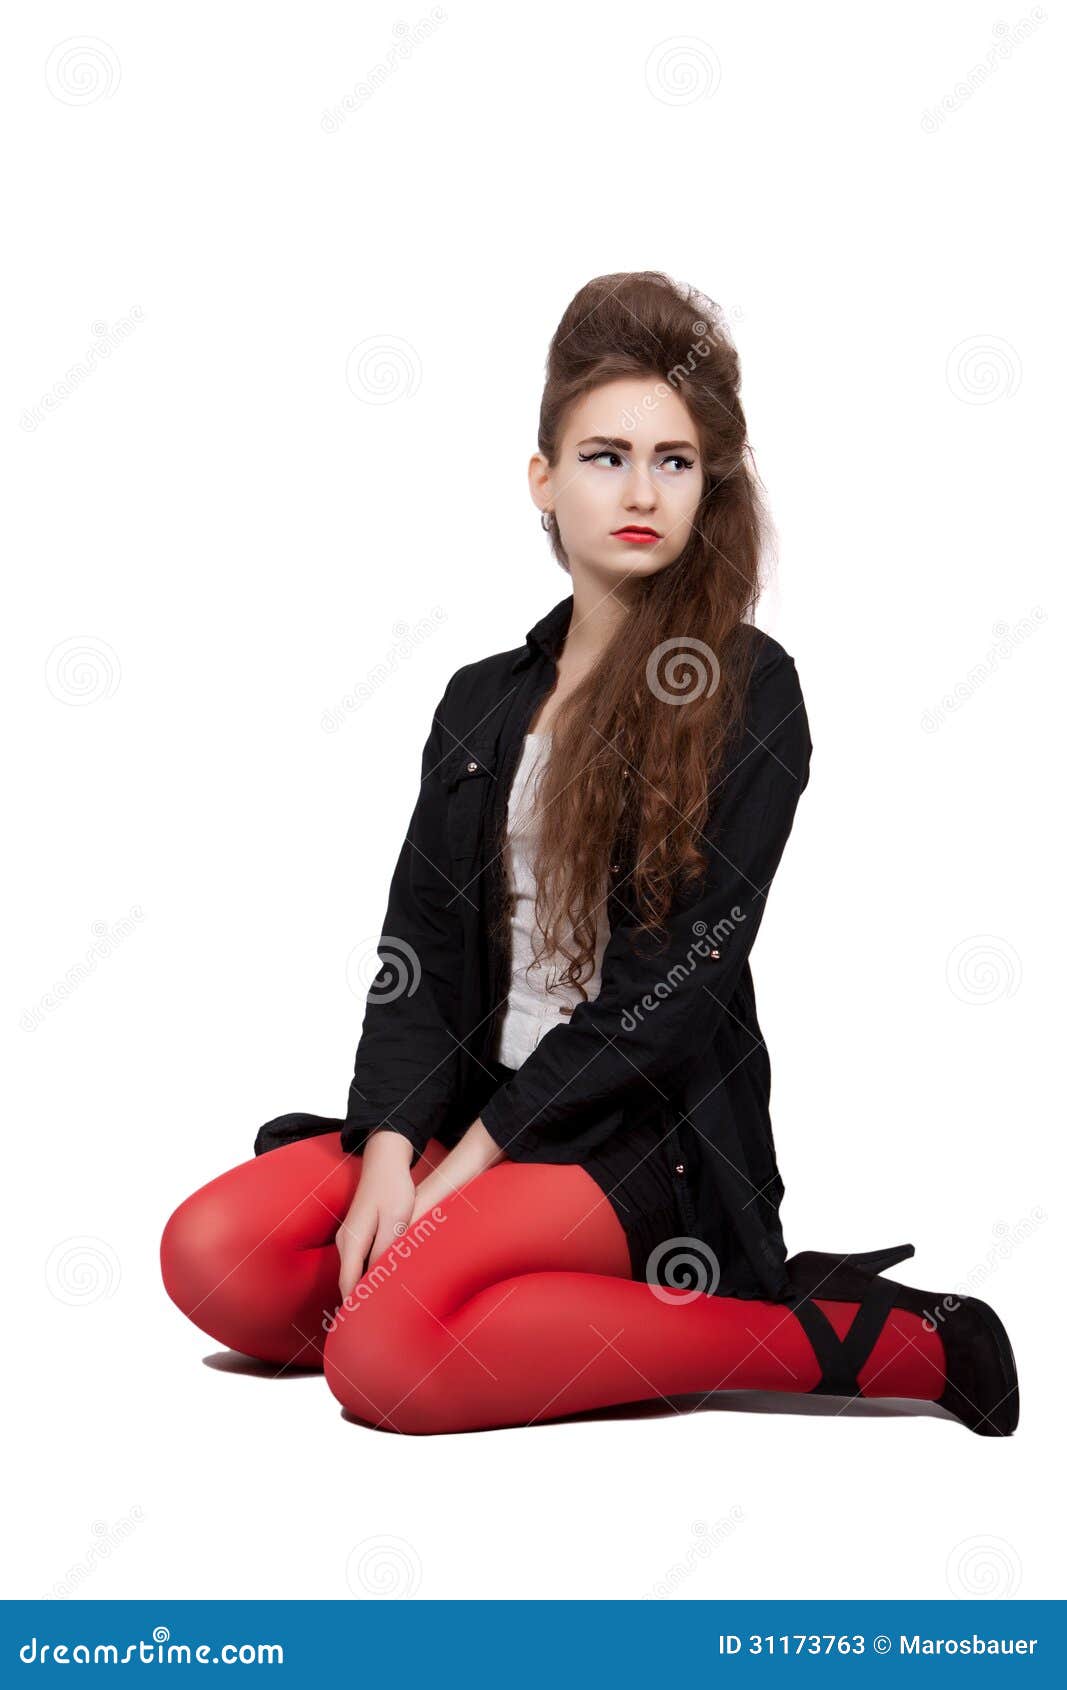 Teenage Girl in Black and Red Clothes Stock Image - Image of dark ...